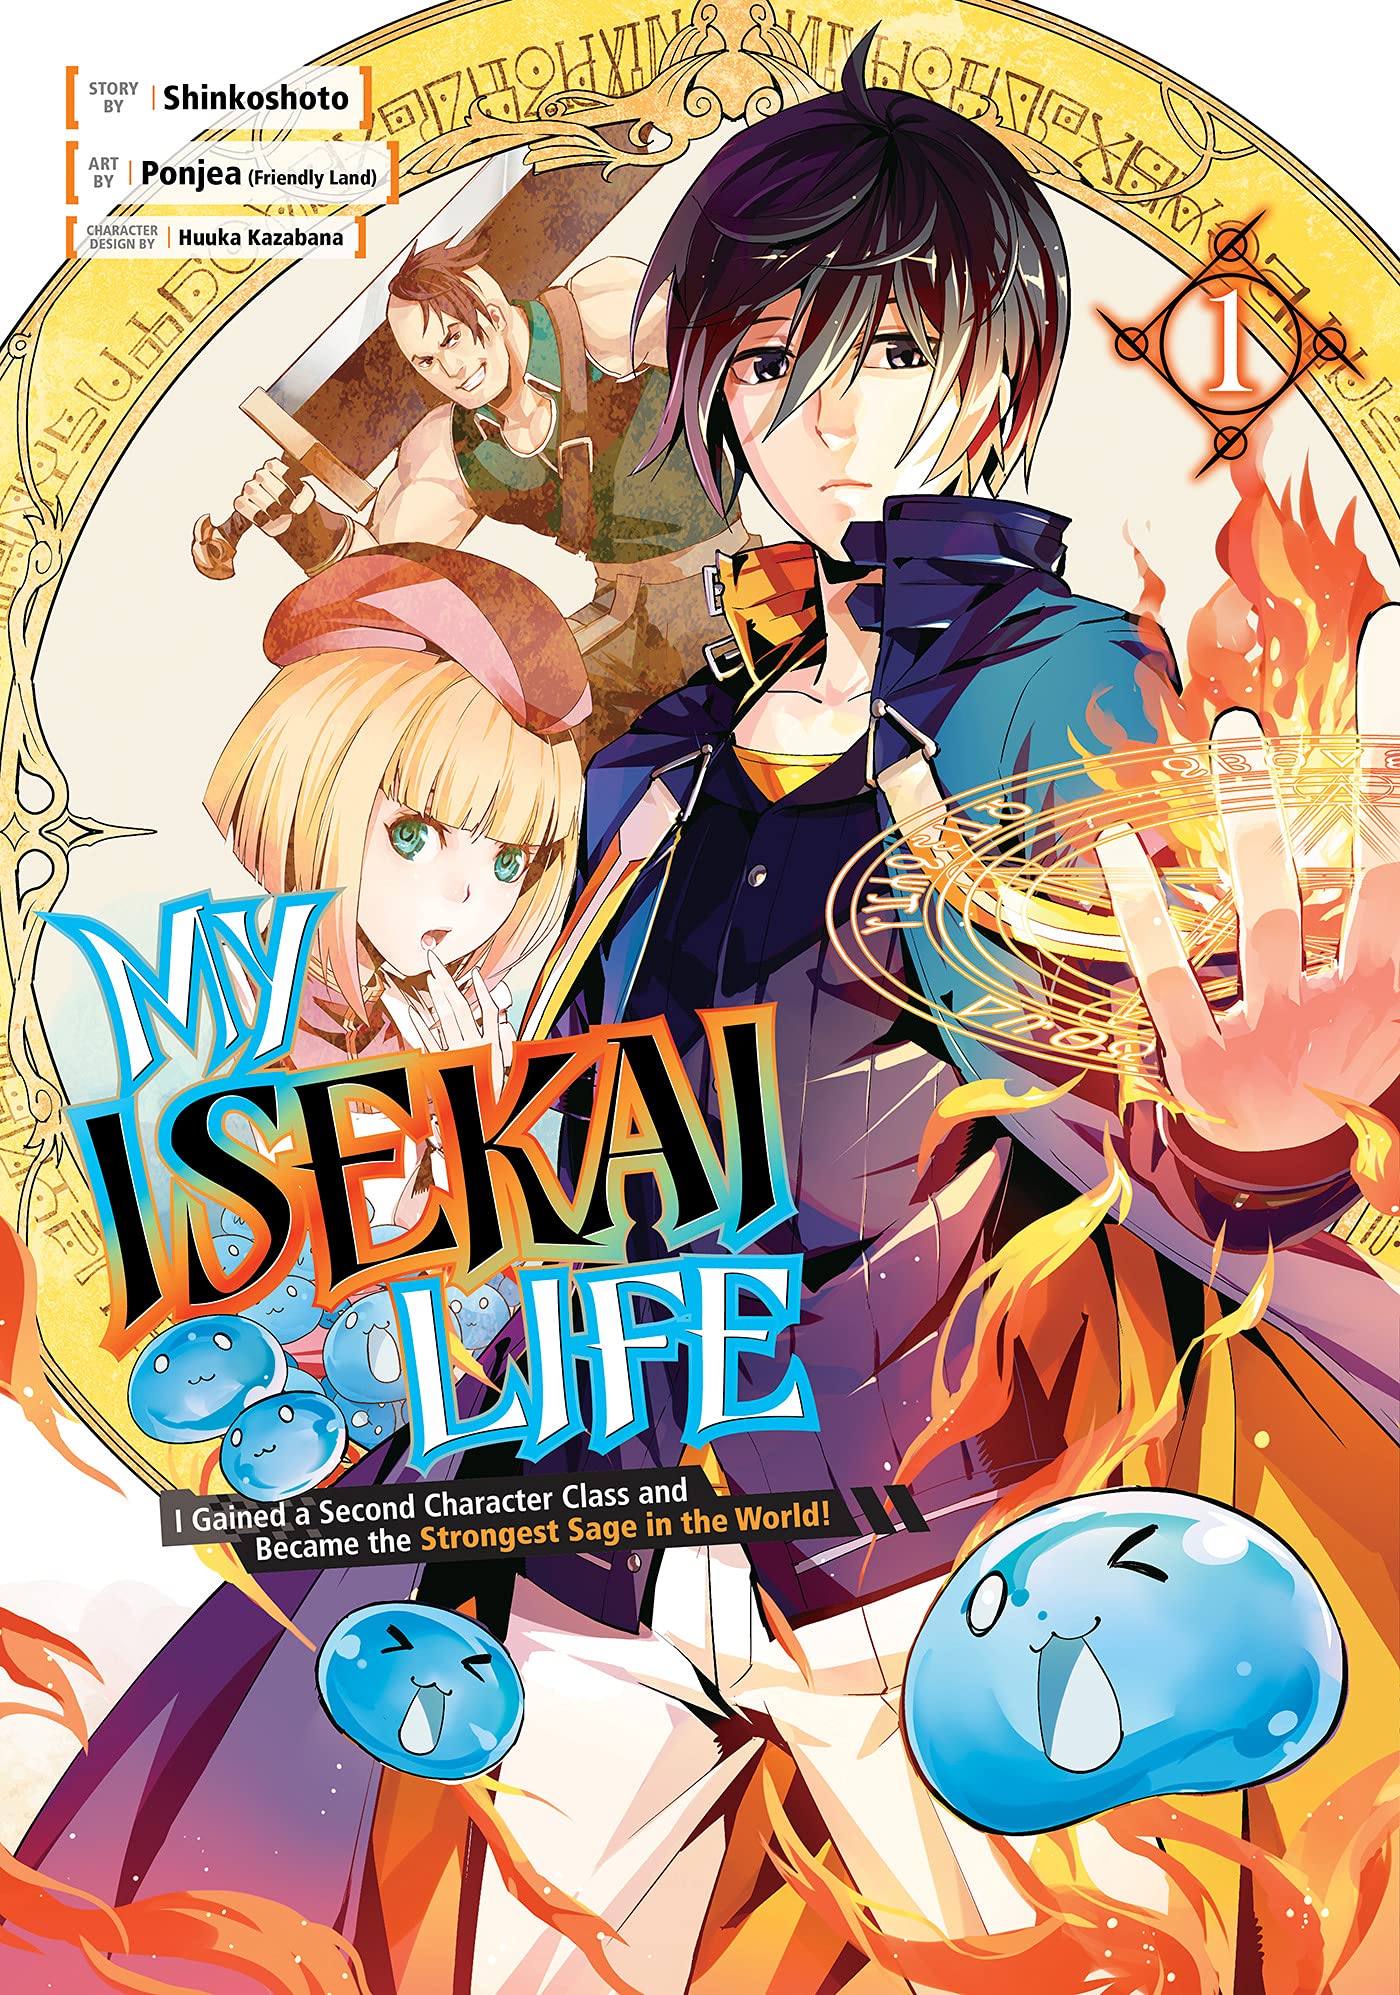 My Isekai Life: I Gained a Second Character Class and Became the Strongest Sage in the World! Vol. 01